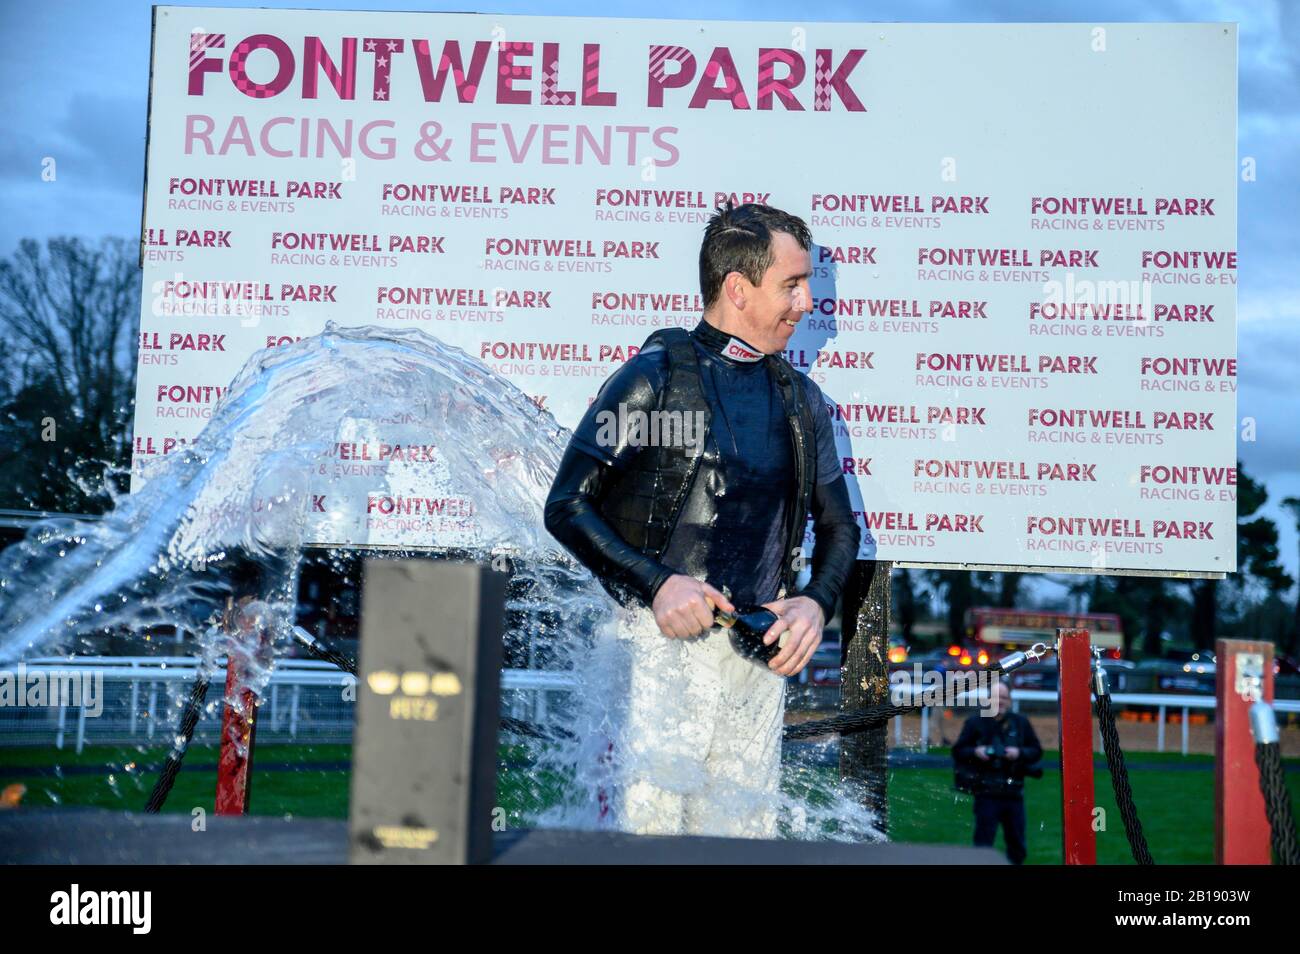 Jockety Leighton Aspell at Fontwell racecourse todayt, Sussex, UK. Her announced he is retiring after today. Darren Cool - 07792308722 - www.dcoolimag Stock Photo